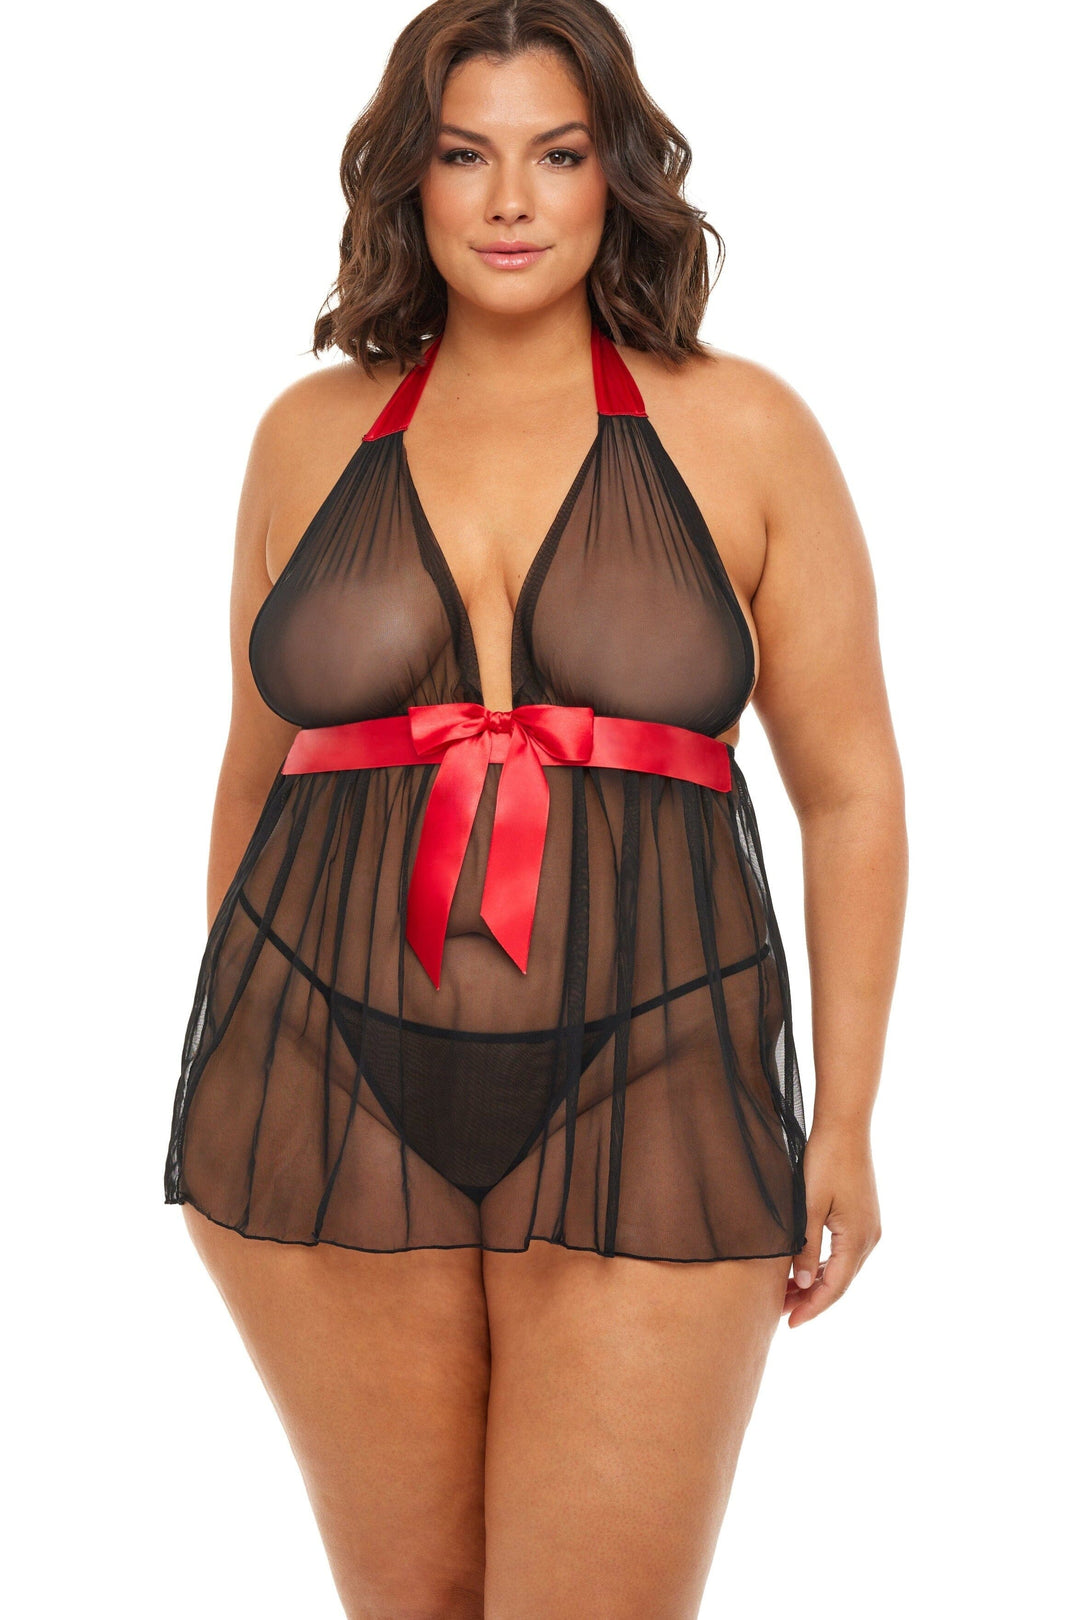 Soft Cup Mesh Babydoll With Functional Halter Ties And Bow Details-Babydolls-Oh La La Cheri-Black-Q-SEXYSHOES.COM